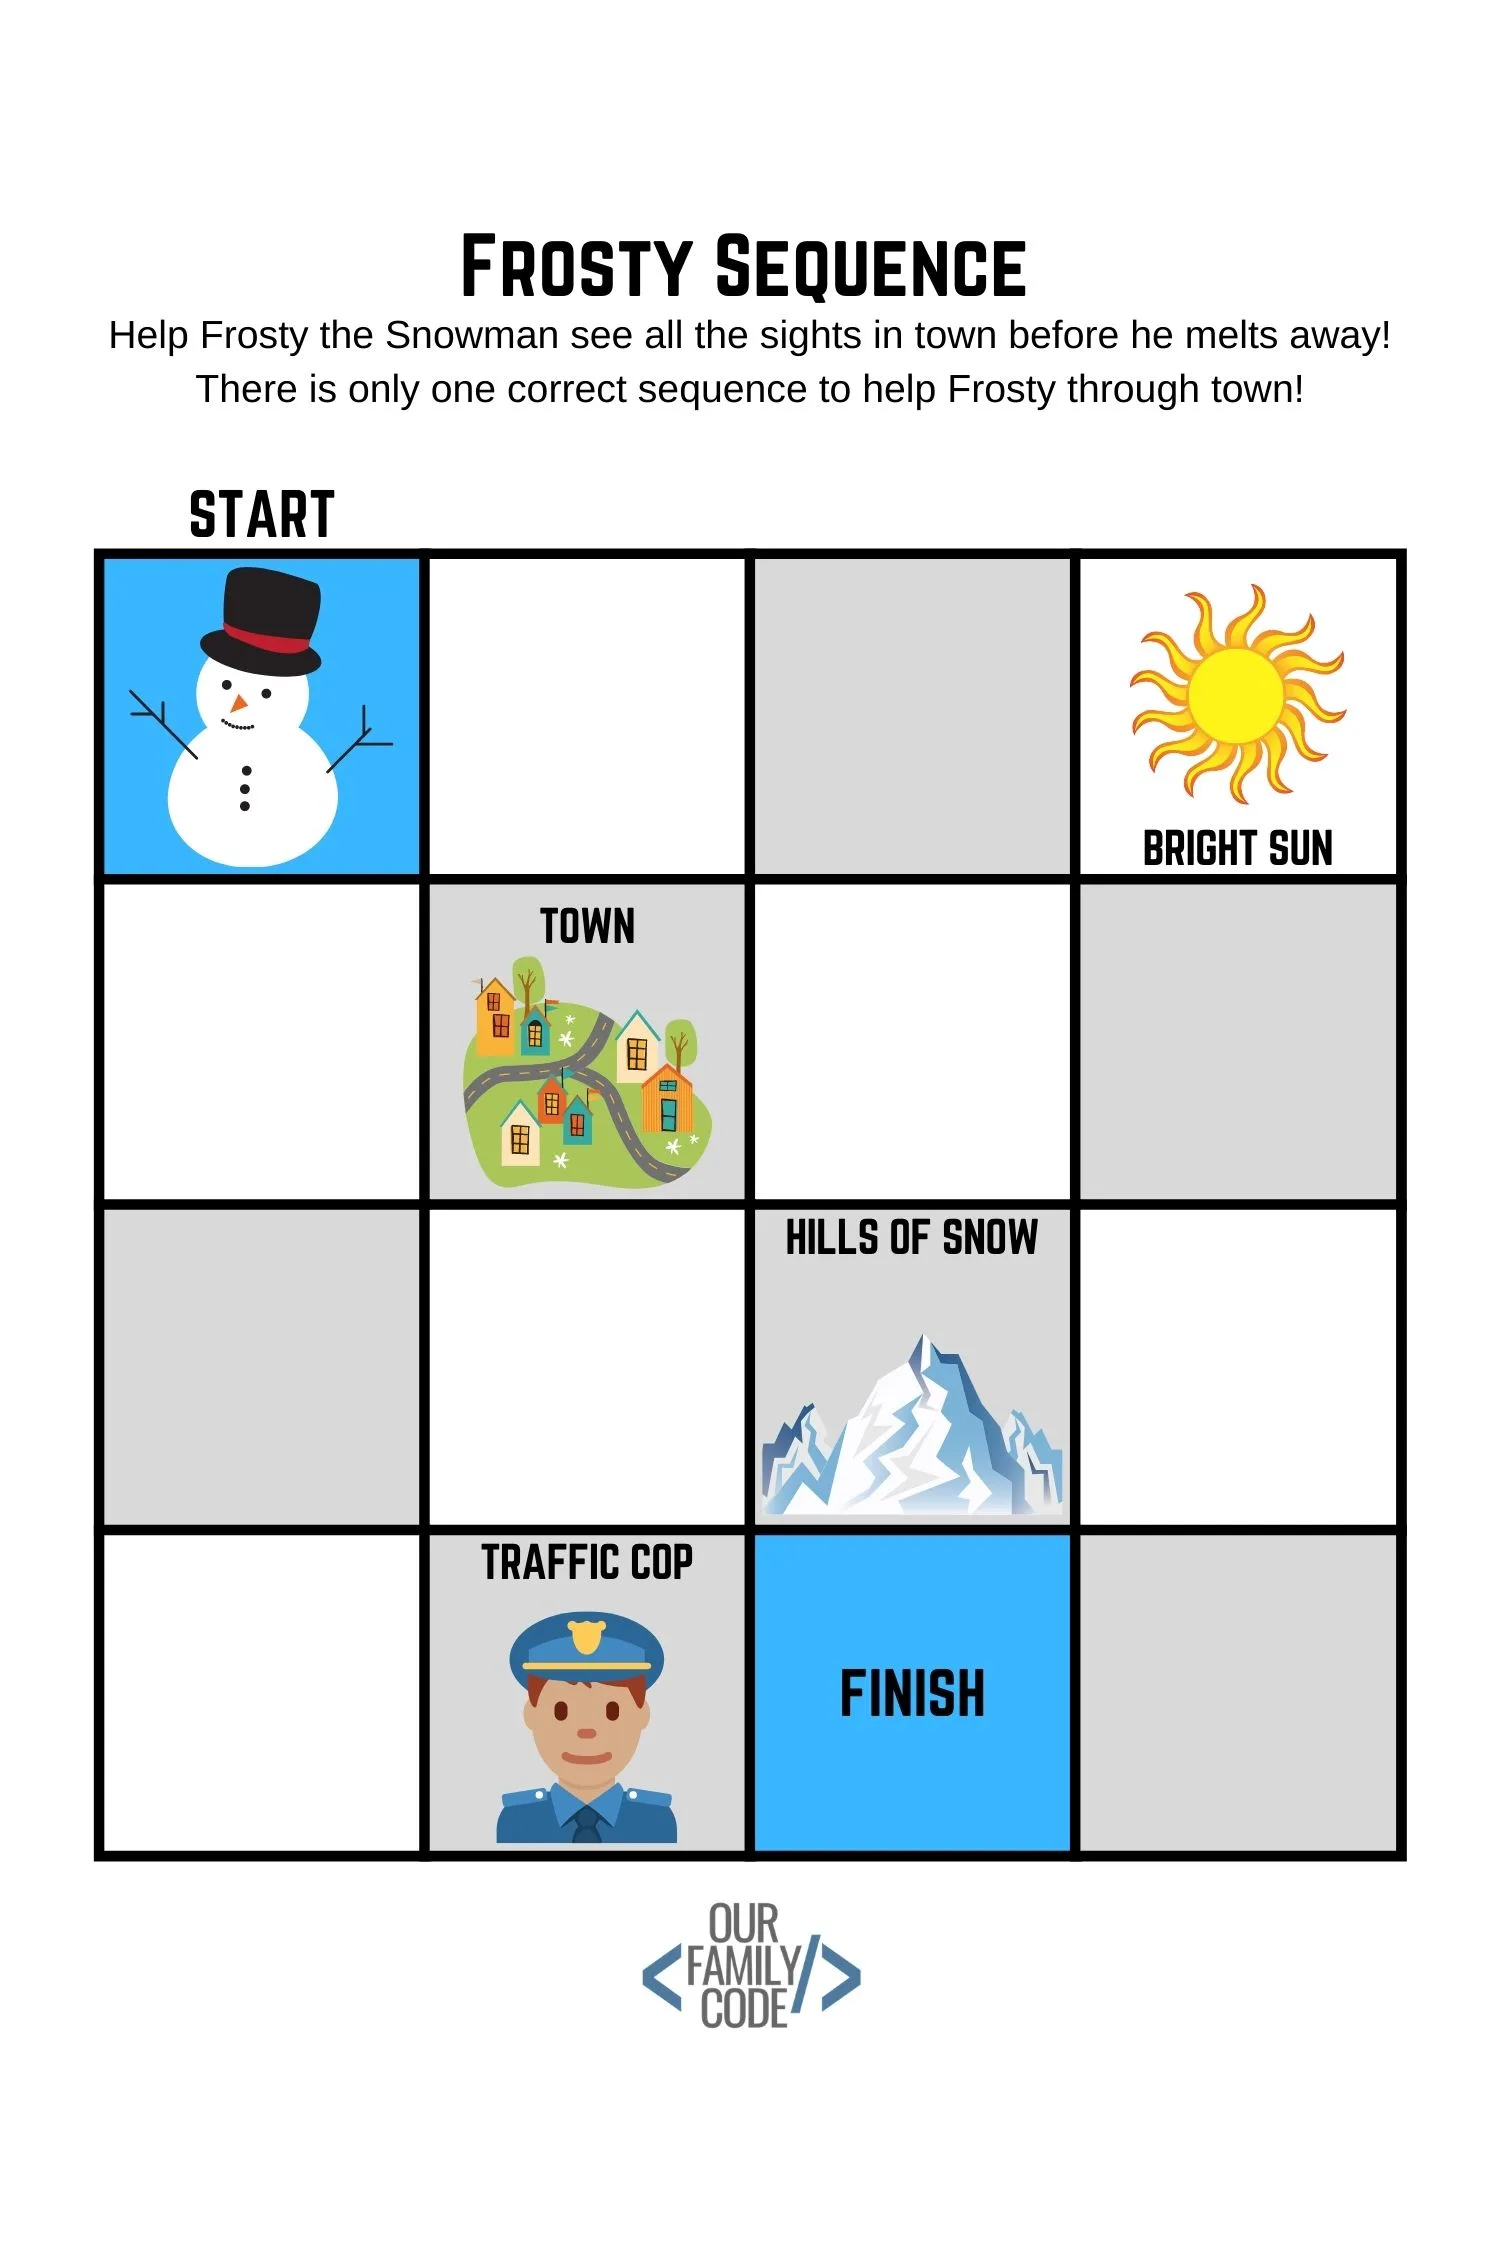 Find the correct sequence to help Frosty the Snowman make his way through town before he melts away in this unplugged coding worksheet for kids! #teachkidstocode #freeworksheets #thanksgivingactivitiesforkids #STEM #STEAM #unpluggedcoding #hourofcode